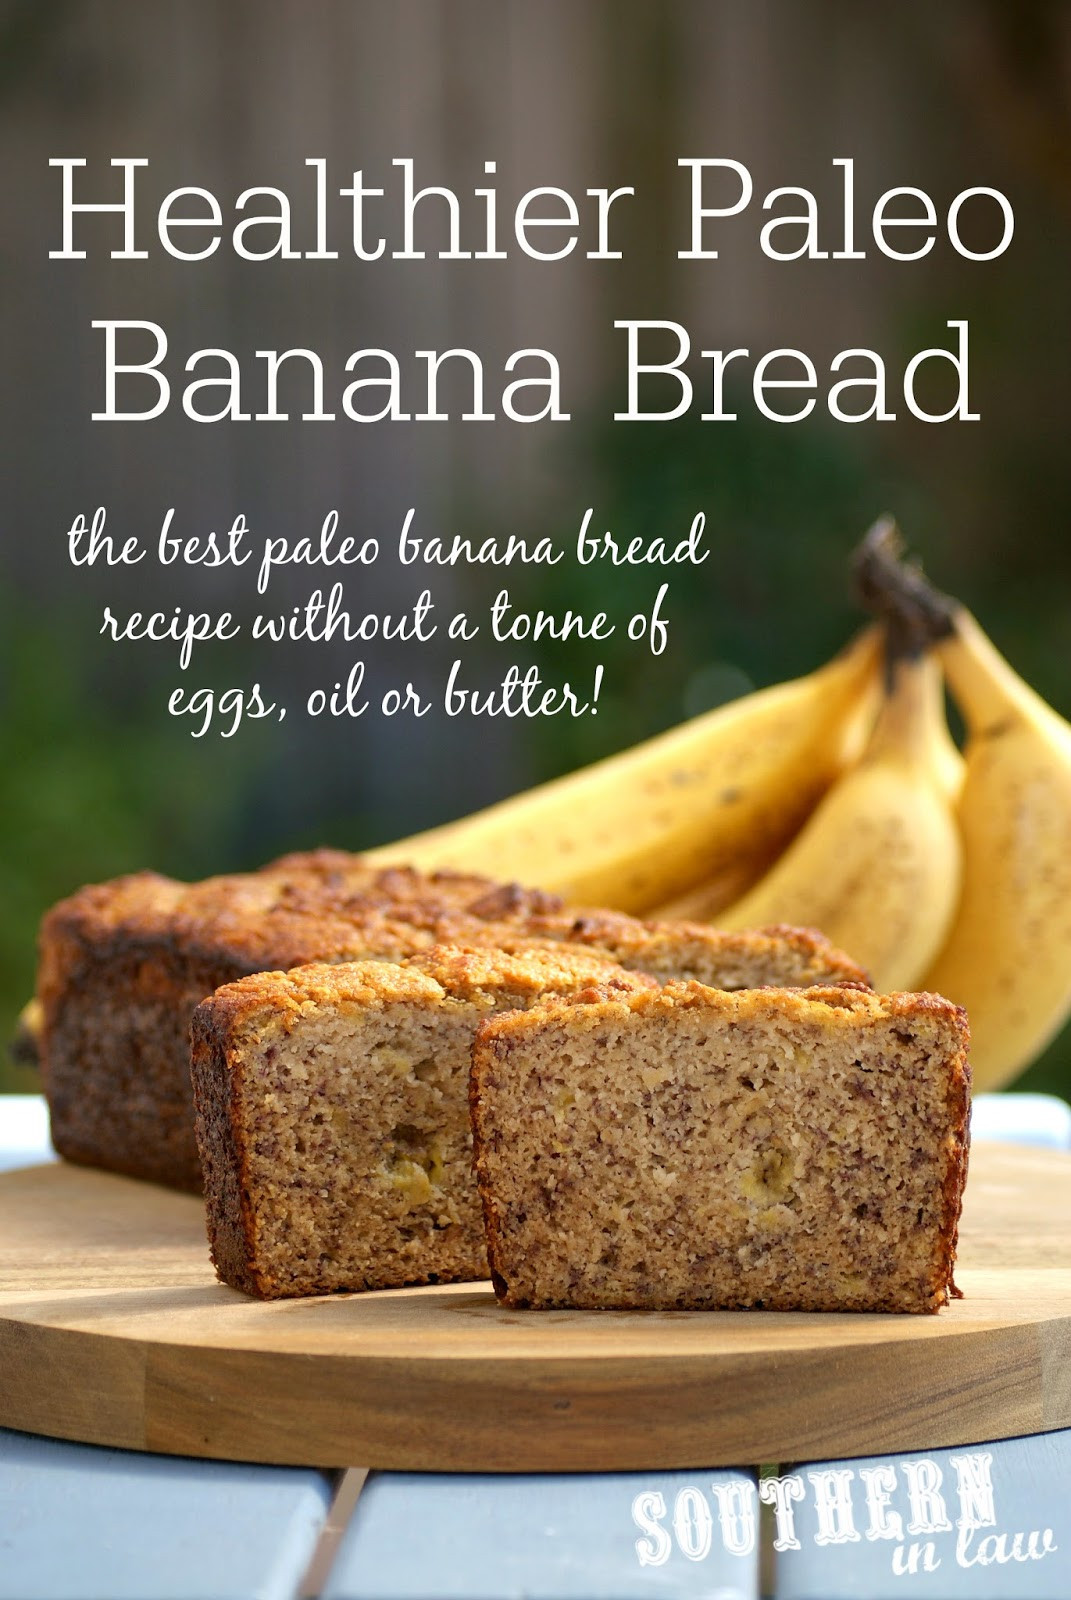 Healthy Low Carb Bread Recipes
 Southern In Law Recipe The Best Healthy Paleo Banana Bread